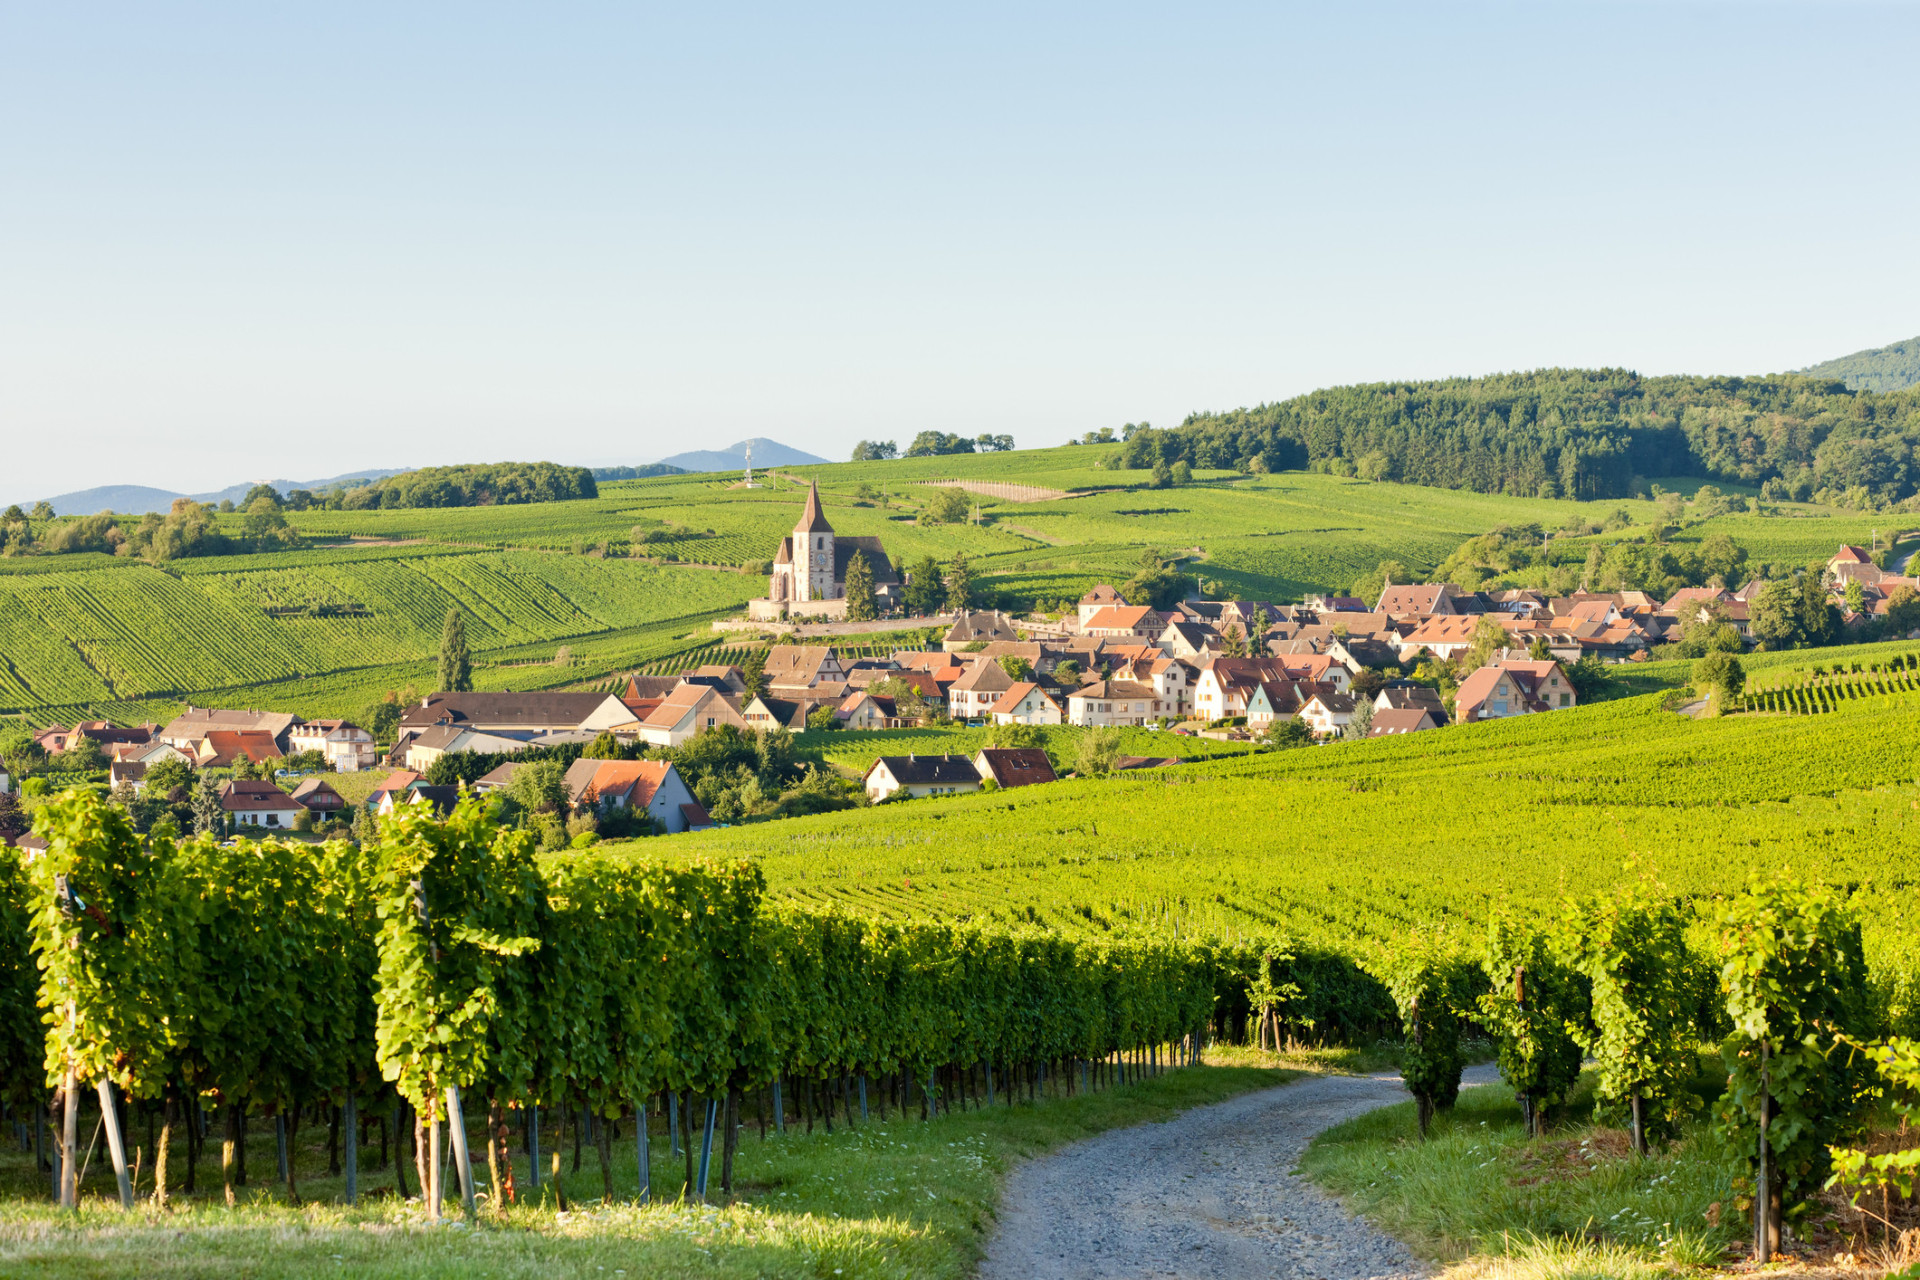 The route snakes through 70 wine-growing villages, many renowned for their scenic beauty.<p>You may also like:<a href="https://www.starsinsider.com/n/192432?utm_source=msn.com&utm_medium=display&utm_campaign=referral_description&utm_content=223384v5en-us"> The highest paid TV presenters in the UK</a></p>